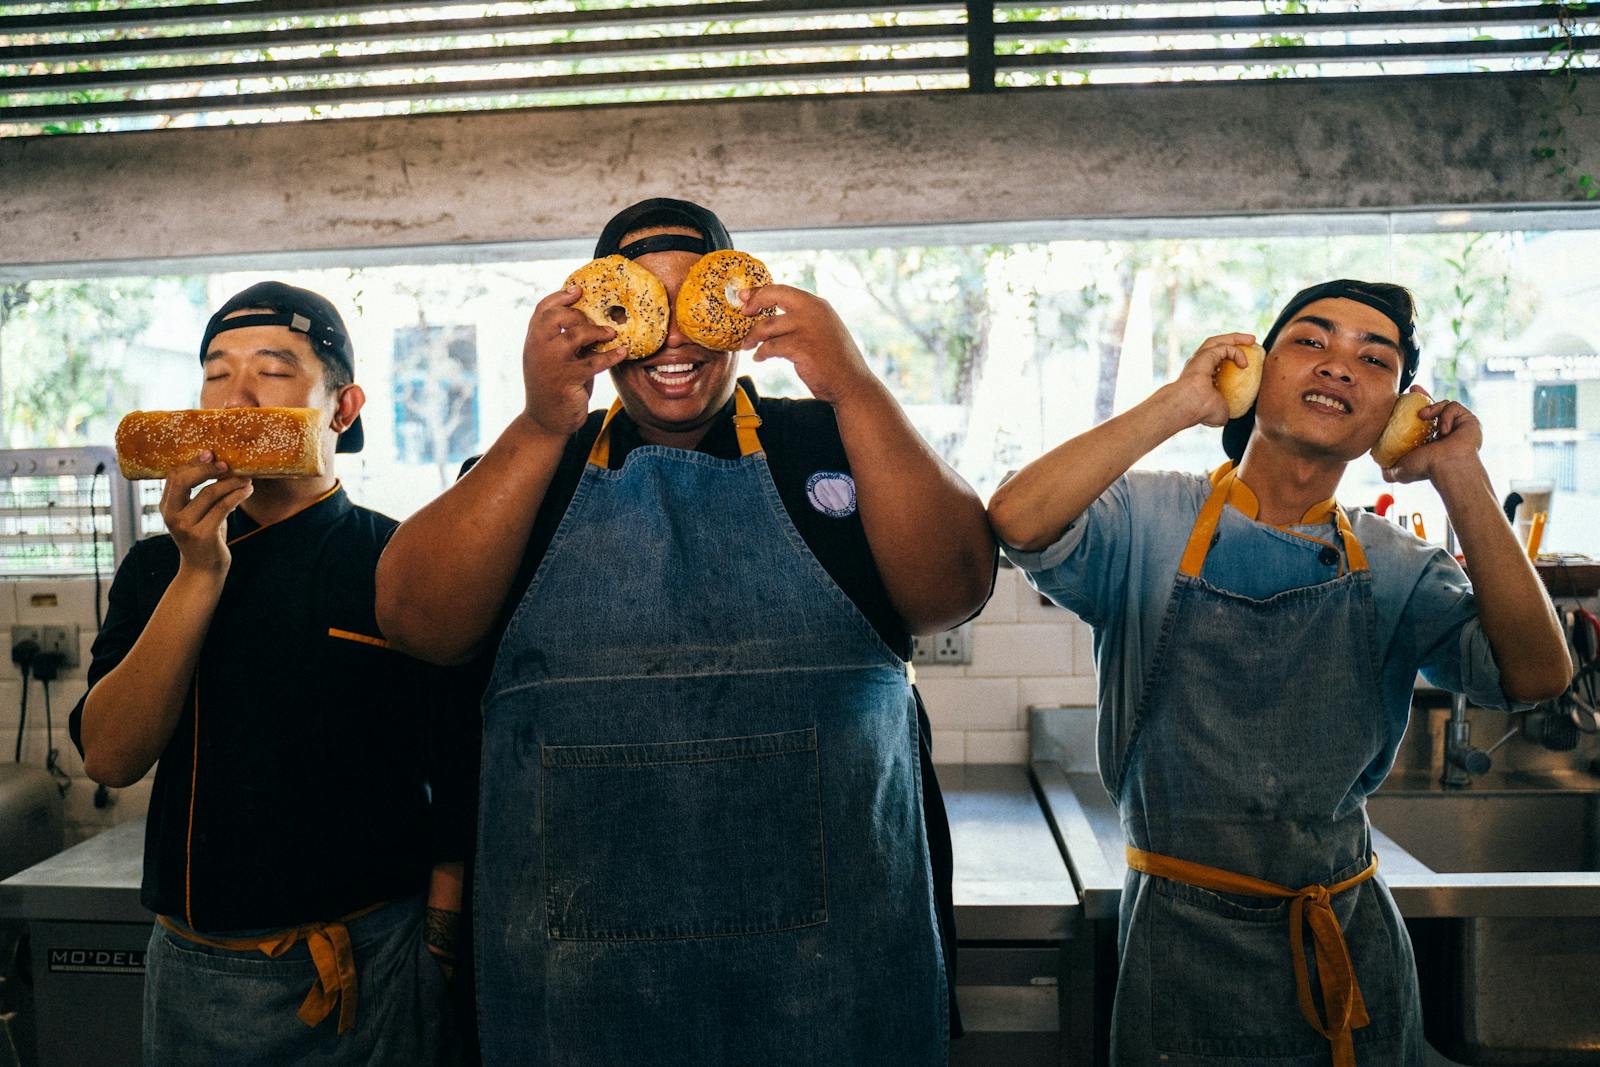 Funny restaurant workers holding up bagels.